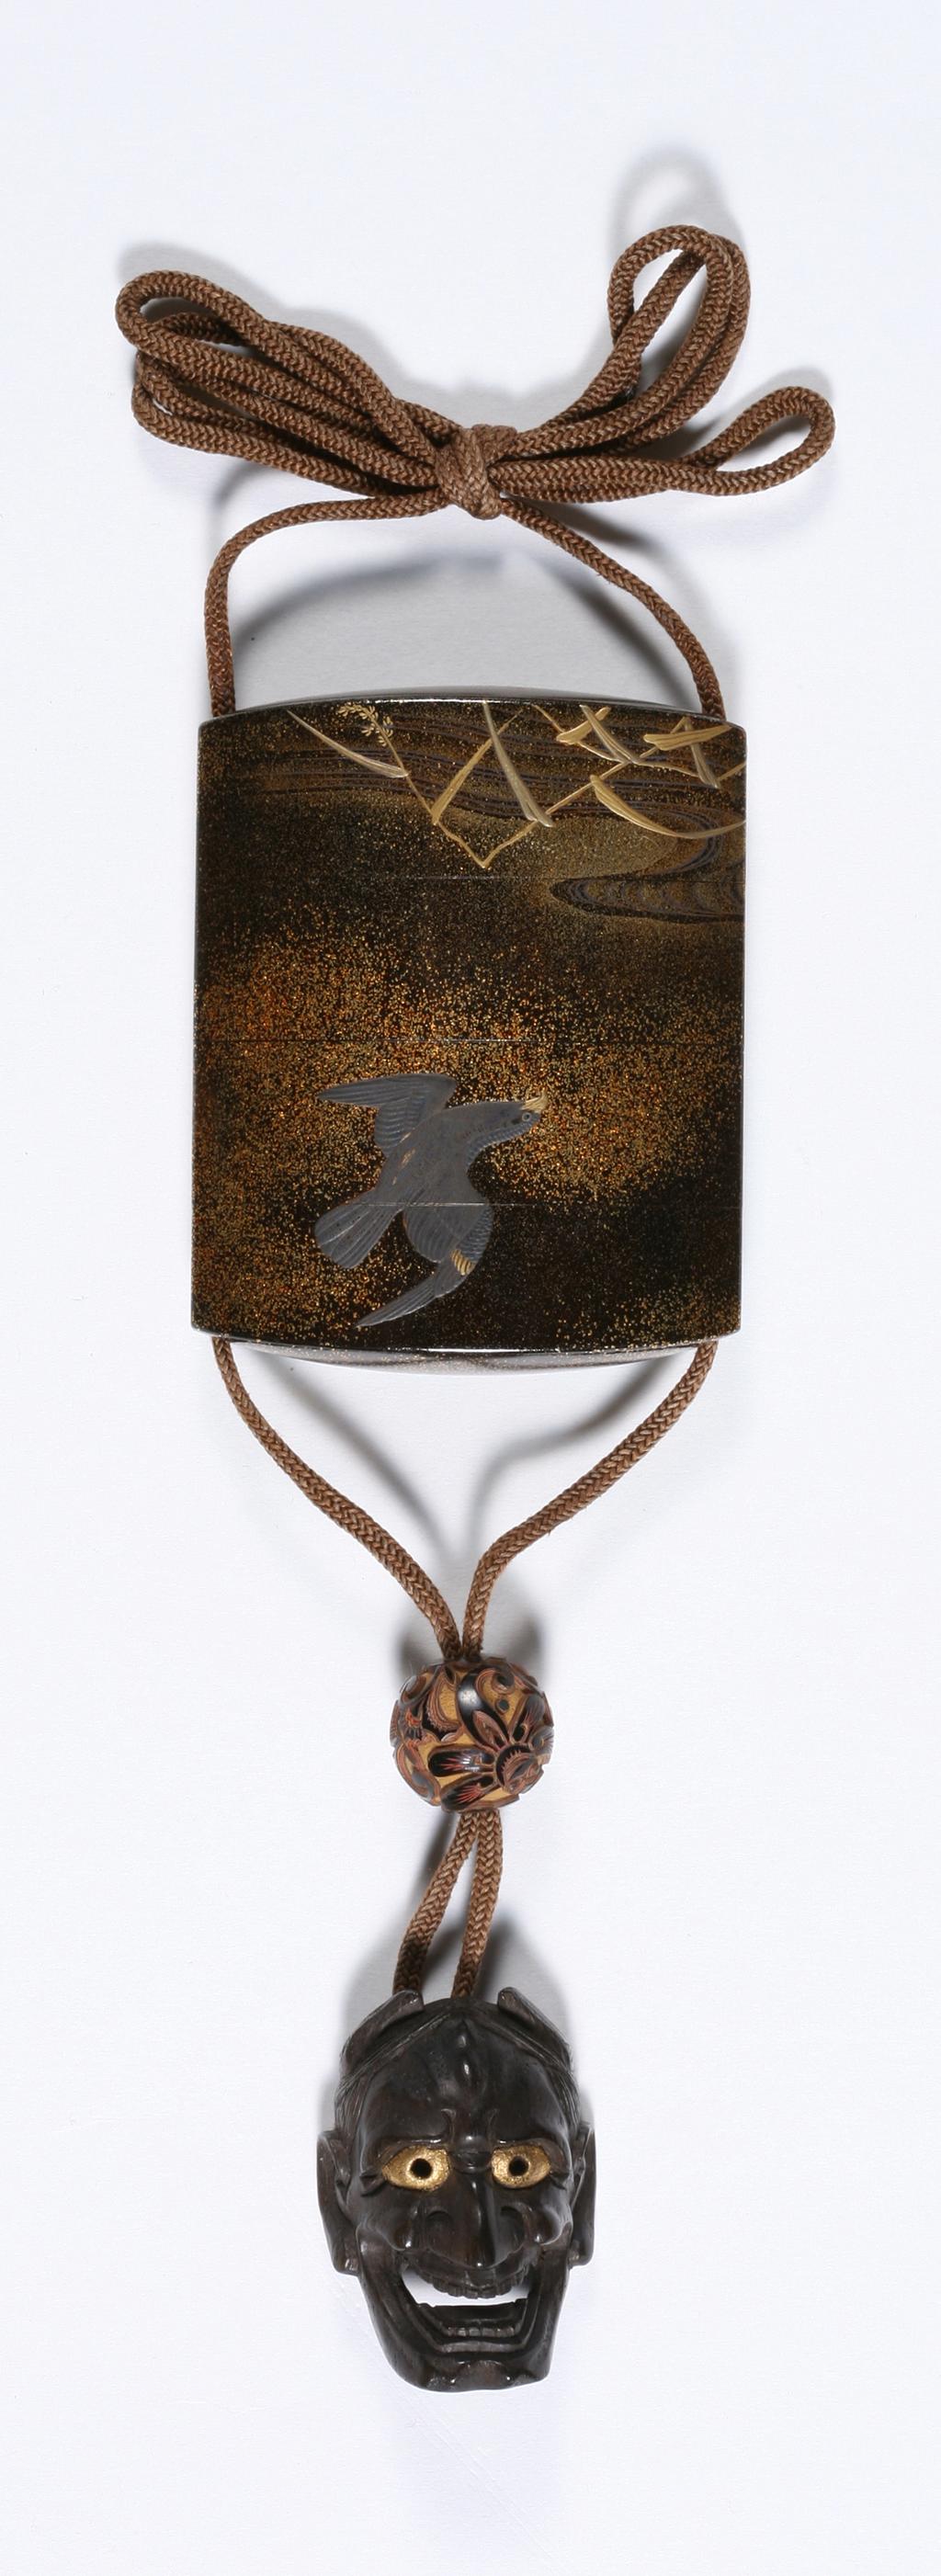 An image of Inro. Ojime of mask and netsuke. Unknown maker, Japan. Lacquer inro with four divisions, and with ojime and netsuke. Black ground with nashiji, decorated in gold and silver/pewter. Depicting an eagle diving towards a crane taking cover in long grasses. Risers and lining nashiji.  Ojime made from carved wood, lacquered in red and black. Mask netsuke of wood, with gold eyes. Height 7 cm, width 5.7 cm, 1700-1868. Edo Period (1615-1868). 